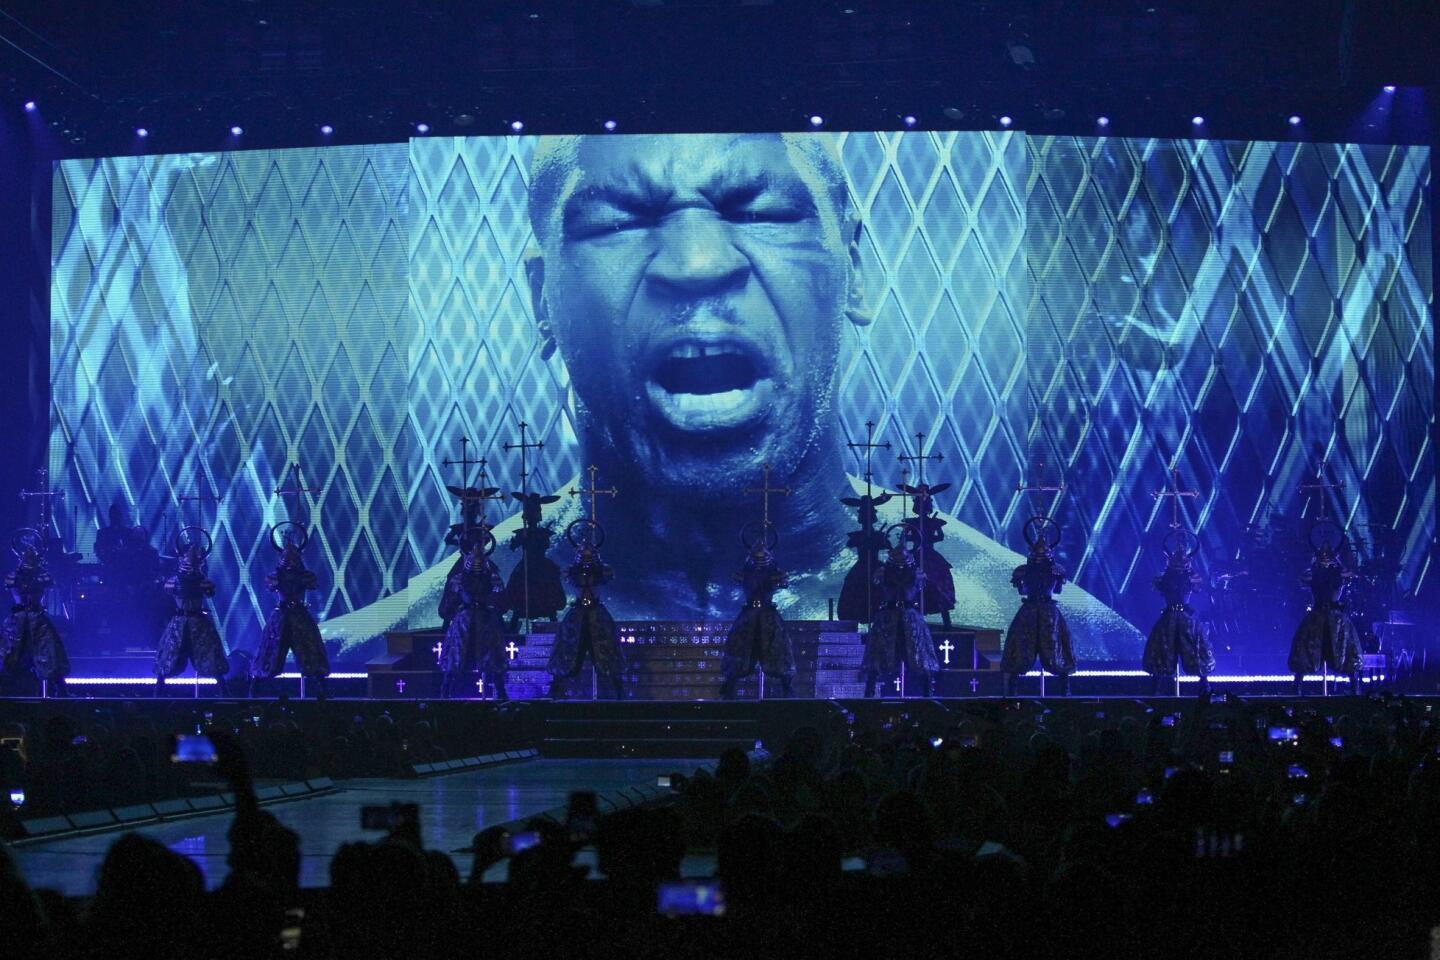 Mike Tyson is projected on a large screen above dancers before Madonna appears .